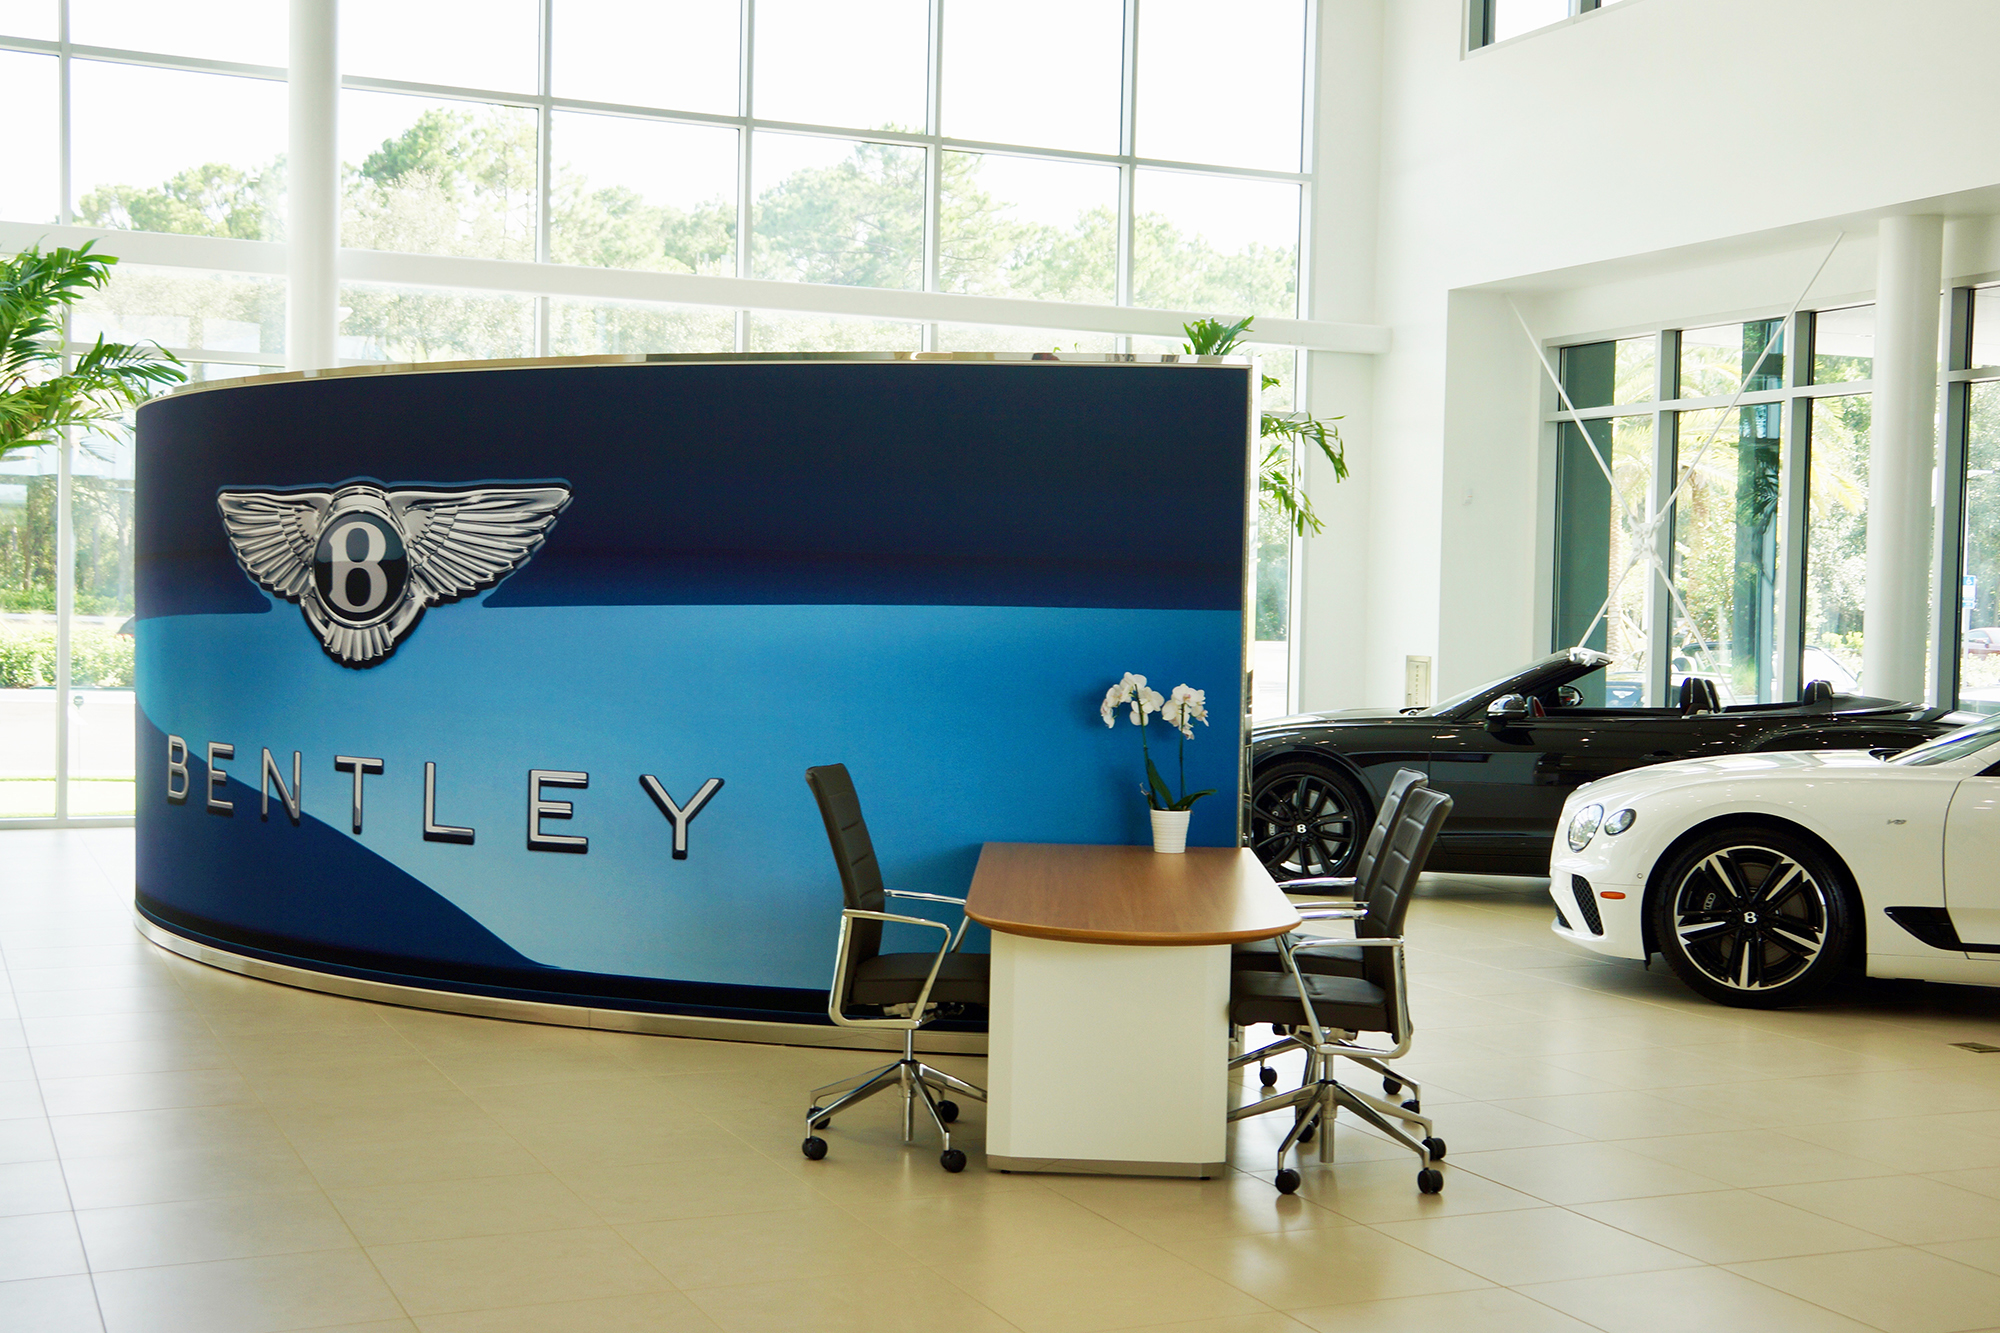 The waiting area inside the Bentley Jacksonville dealership. (Photo by Katie Garwood)